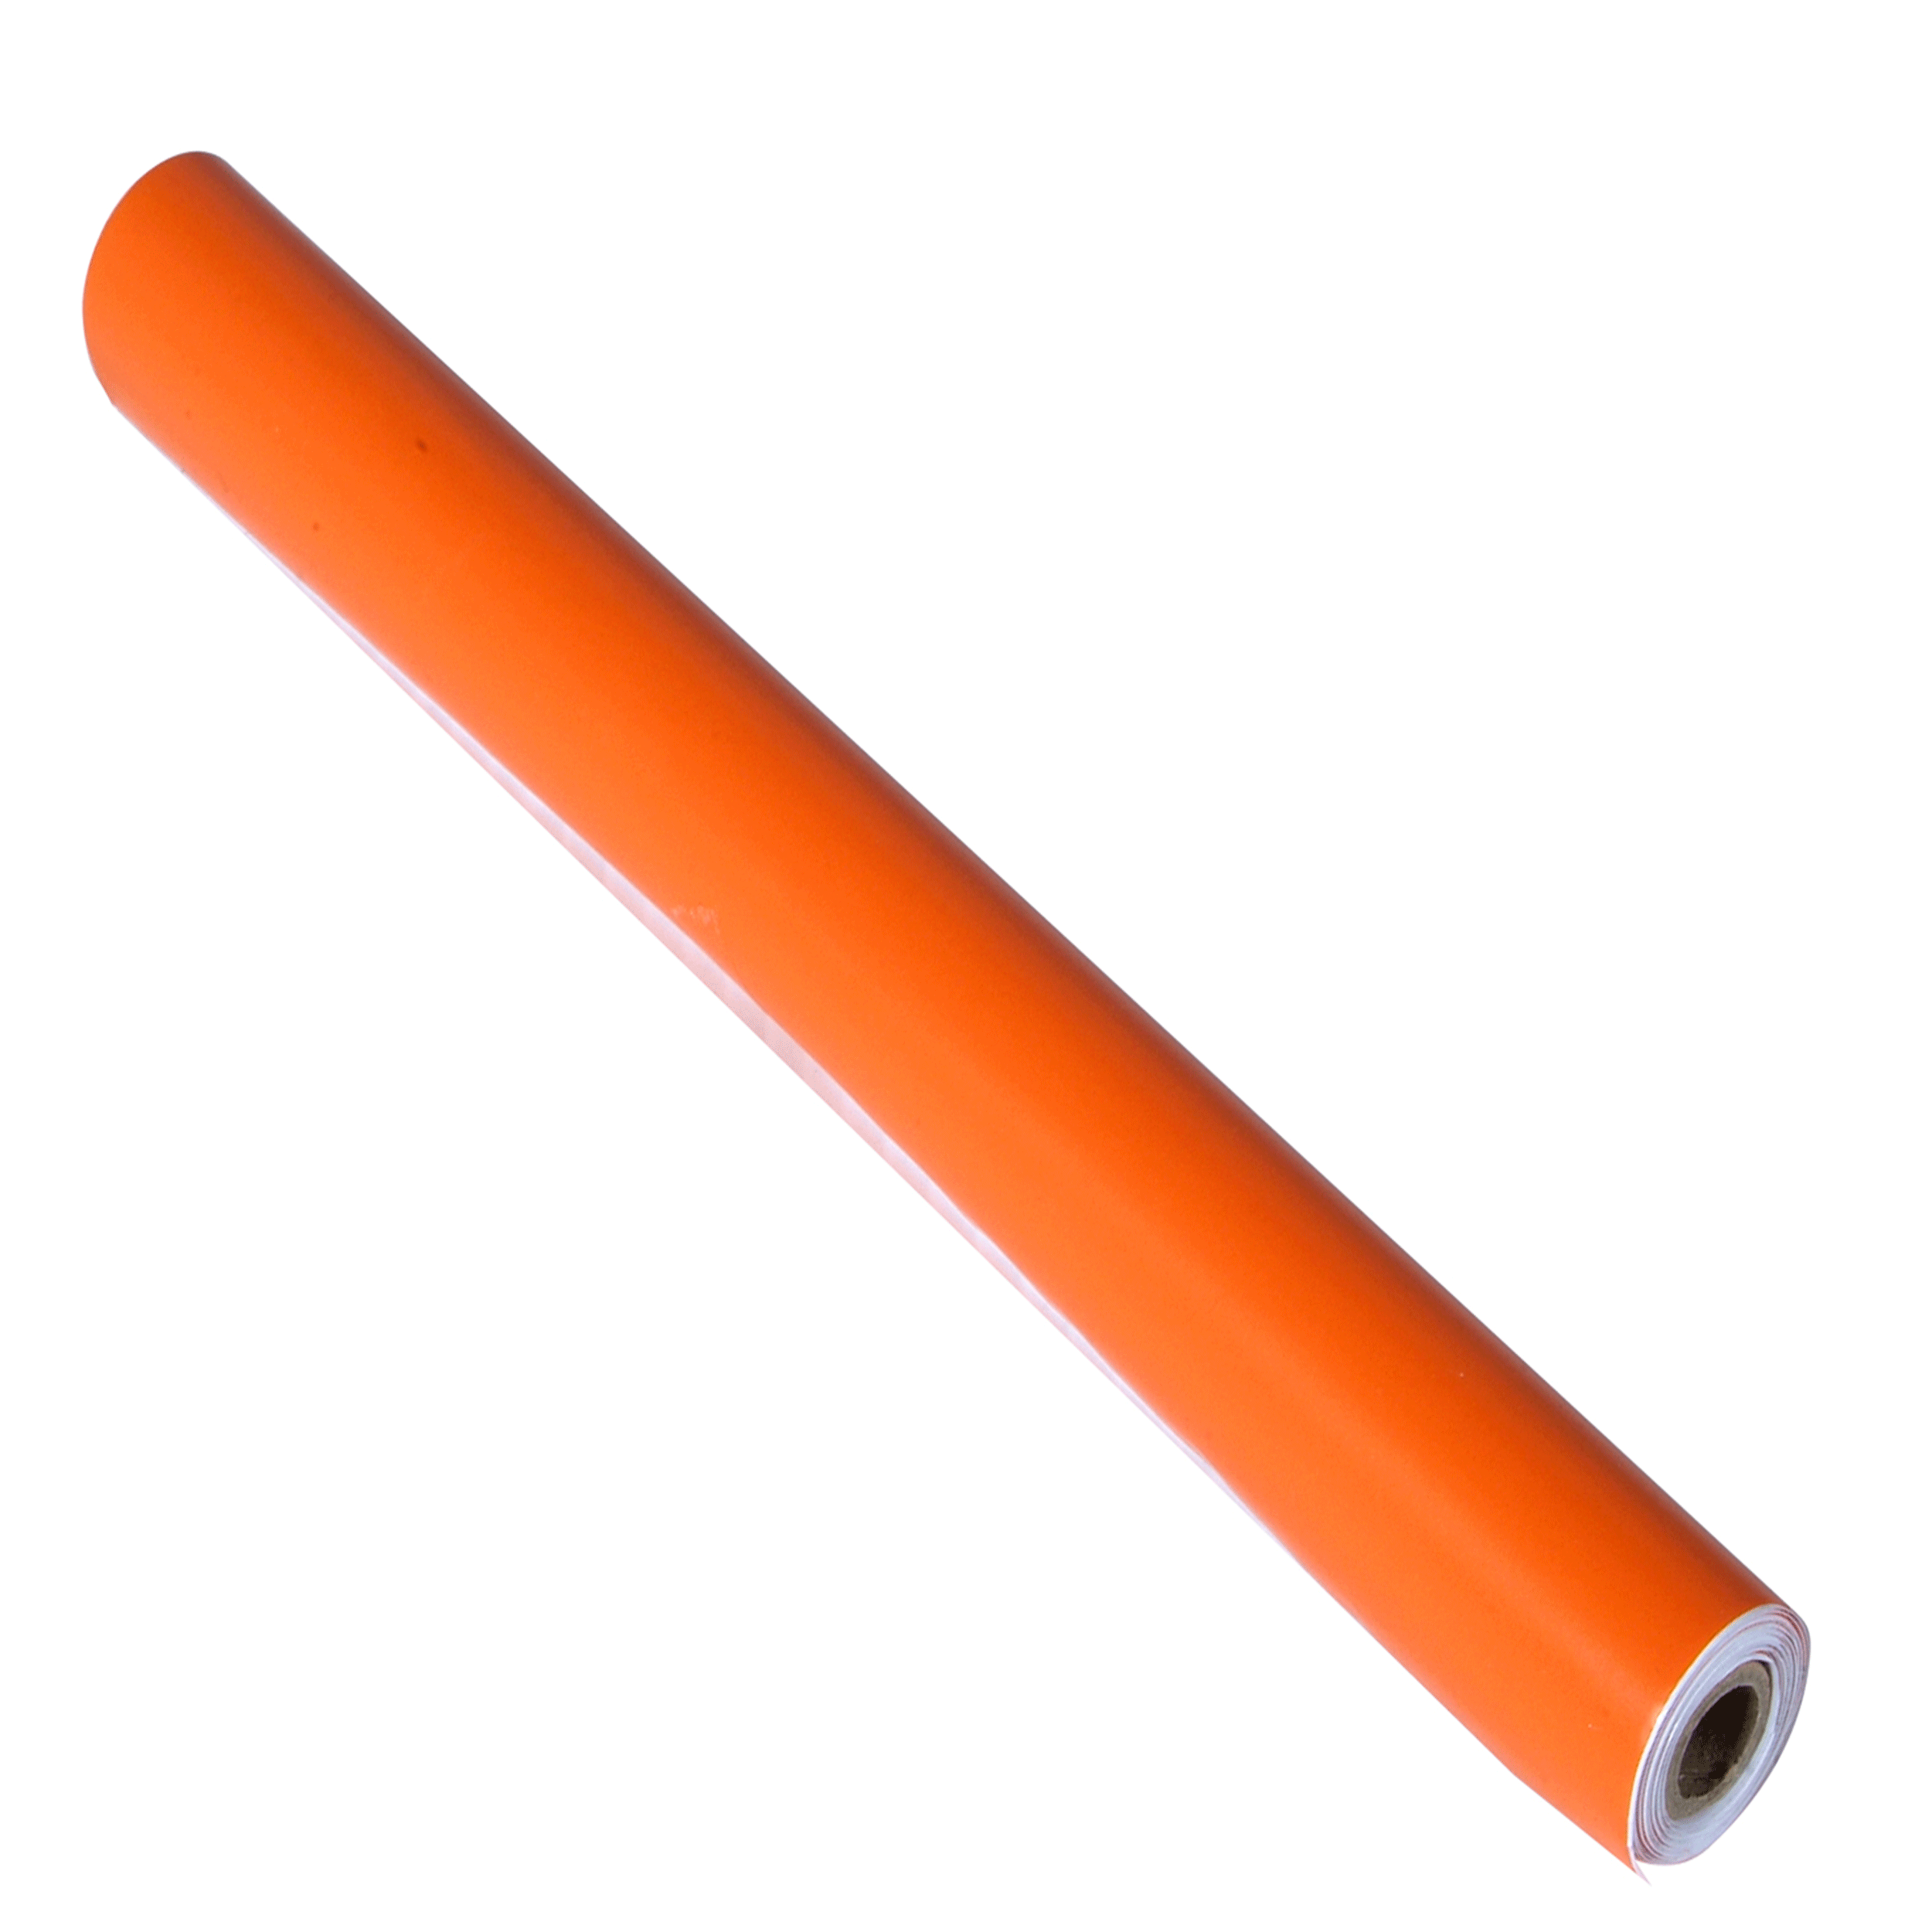 12" X 60" Shadow Board Orange Vinyl Self-adhesive Tape Roll To Silhouette And Manage Tools And Equipment